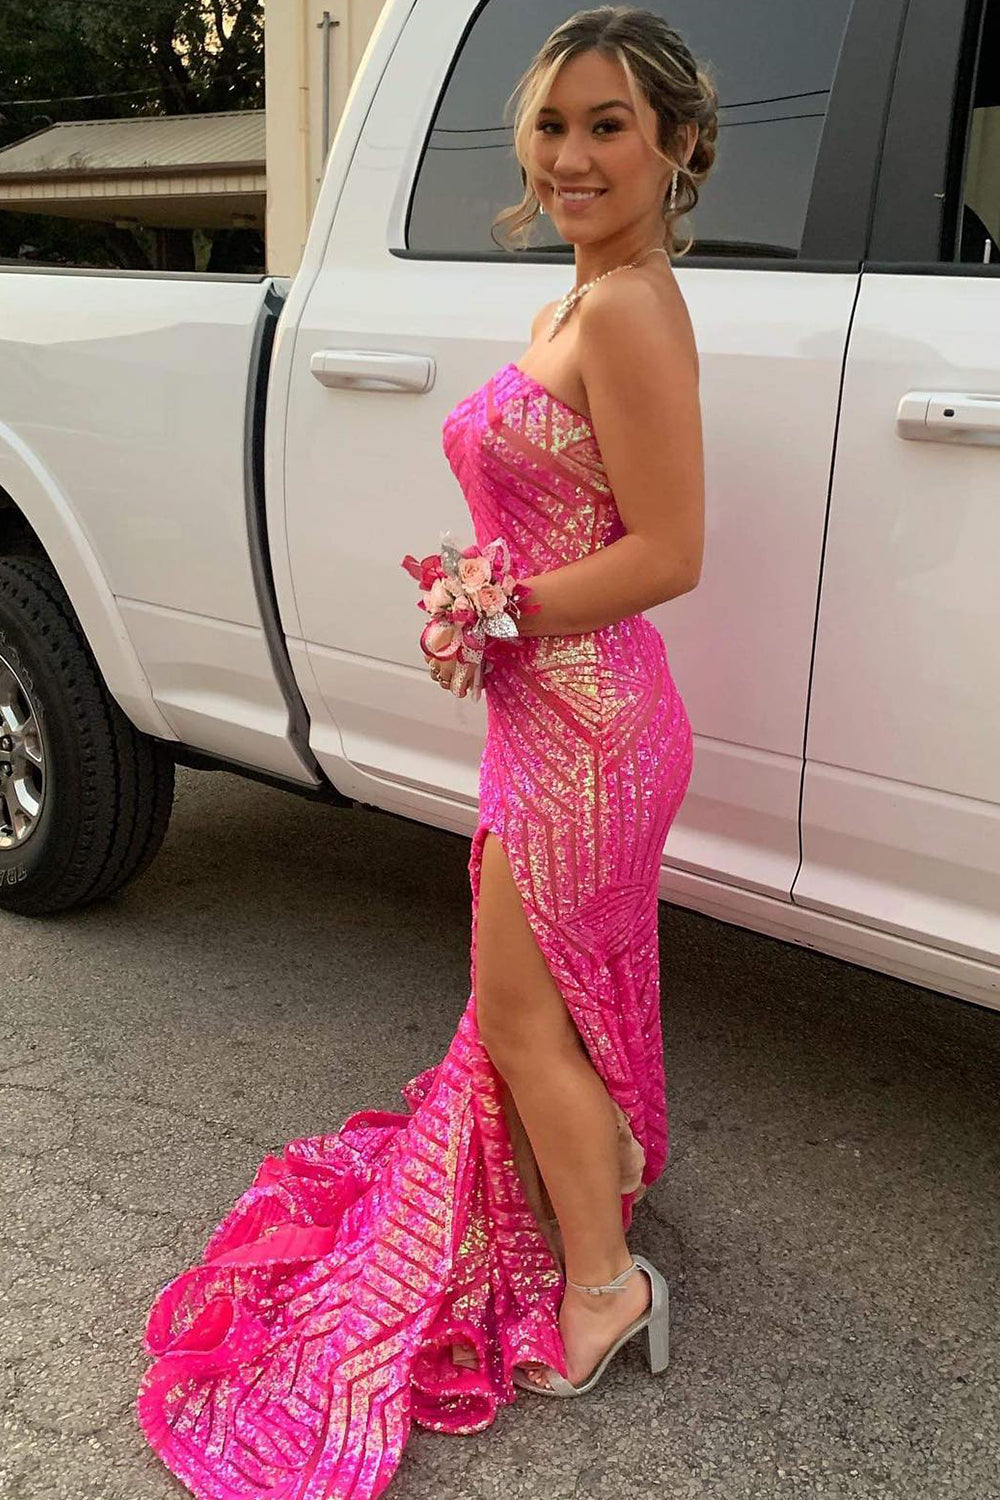 dressimeMermaid Sequins Strapless Long Prom Dresses With Slit 